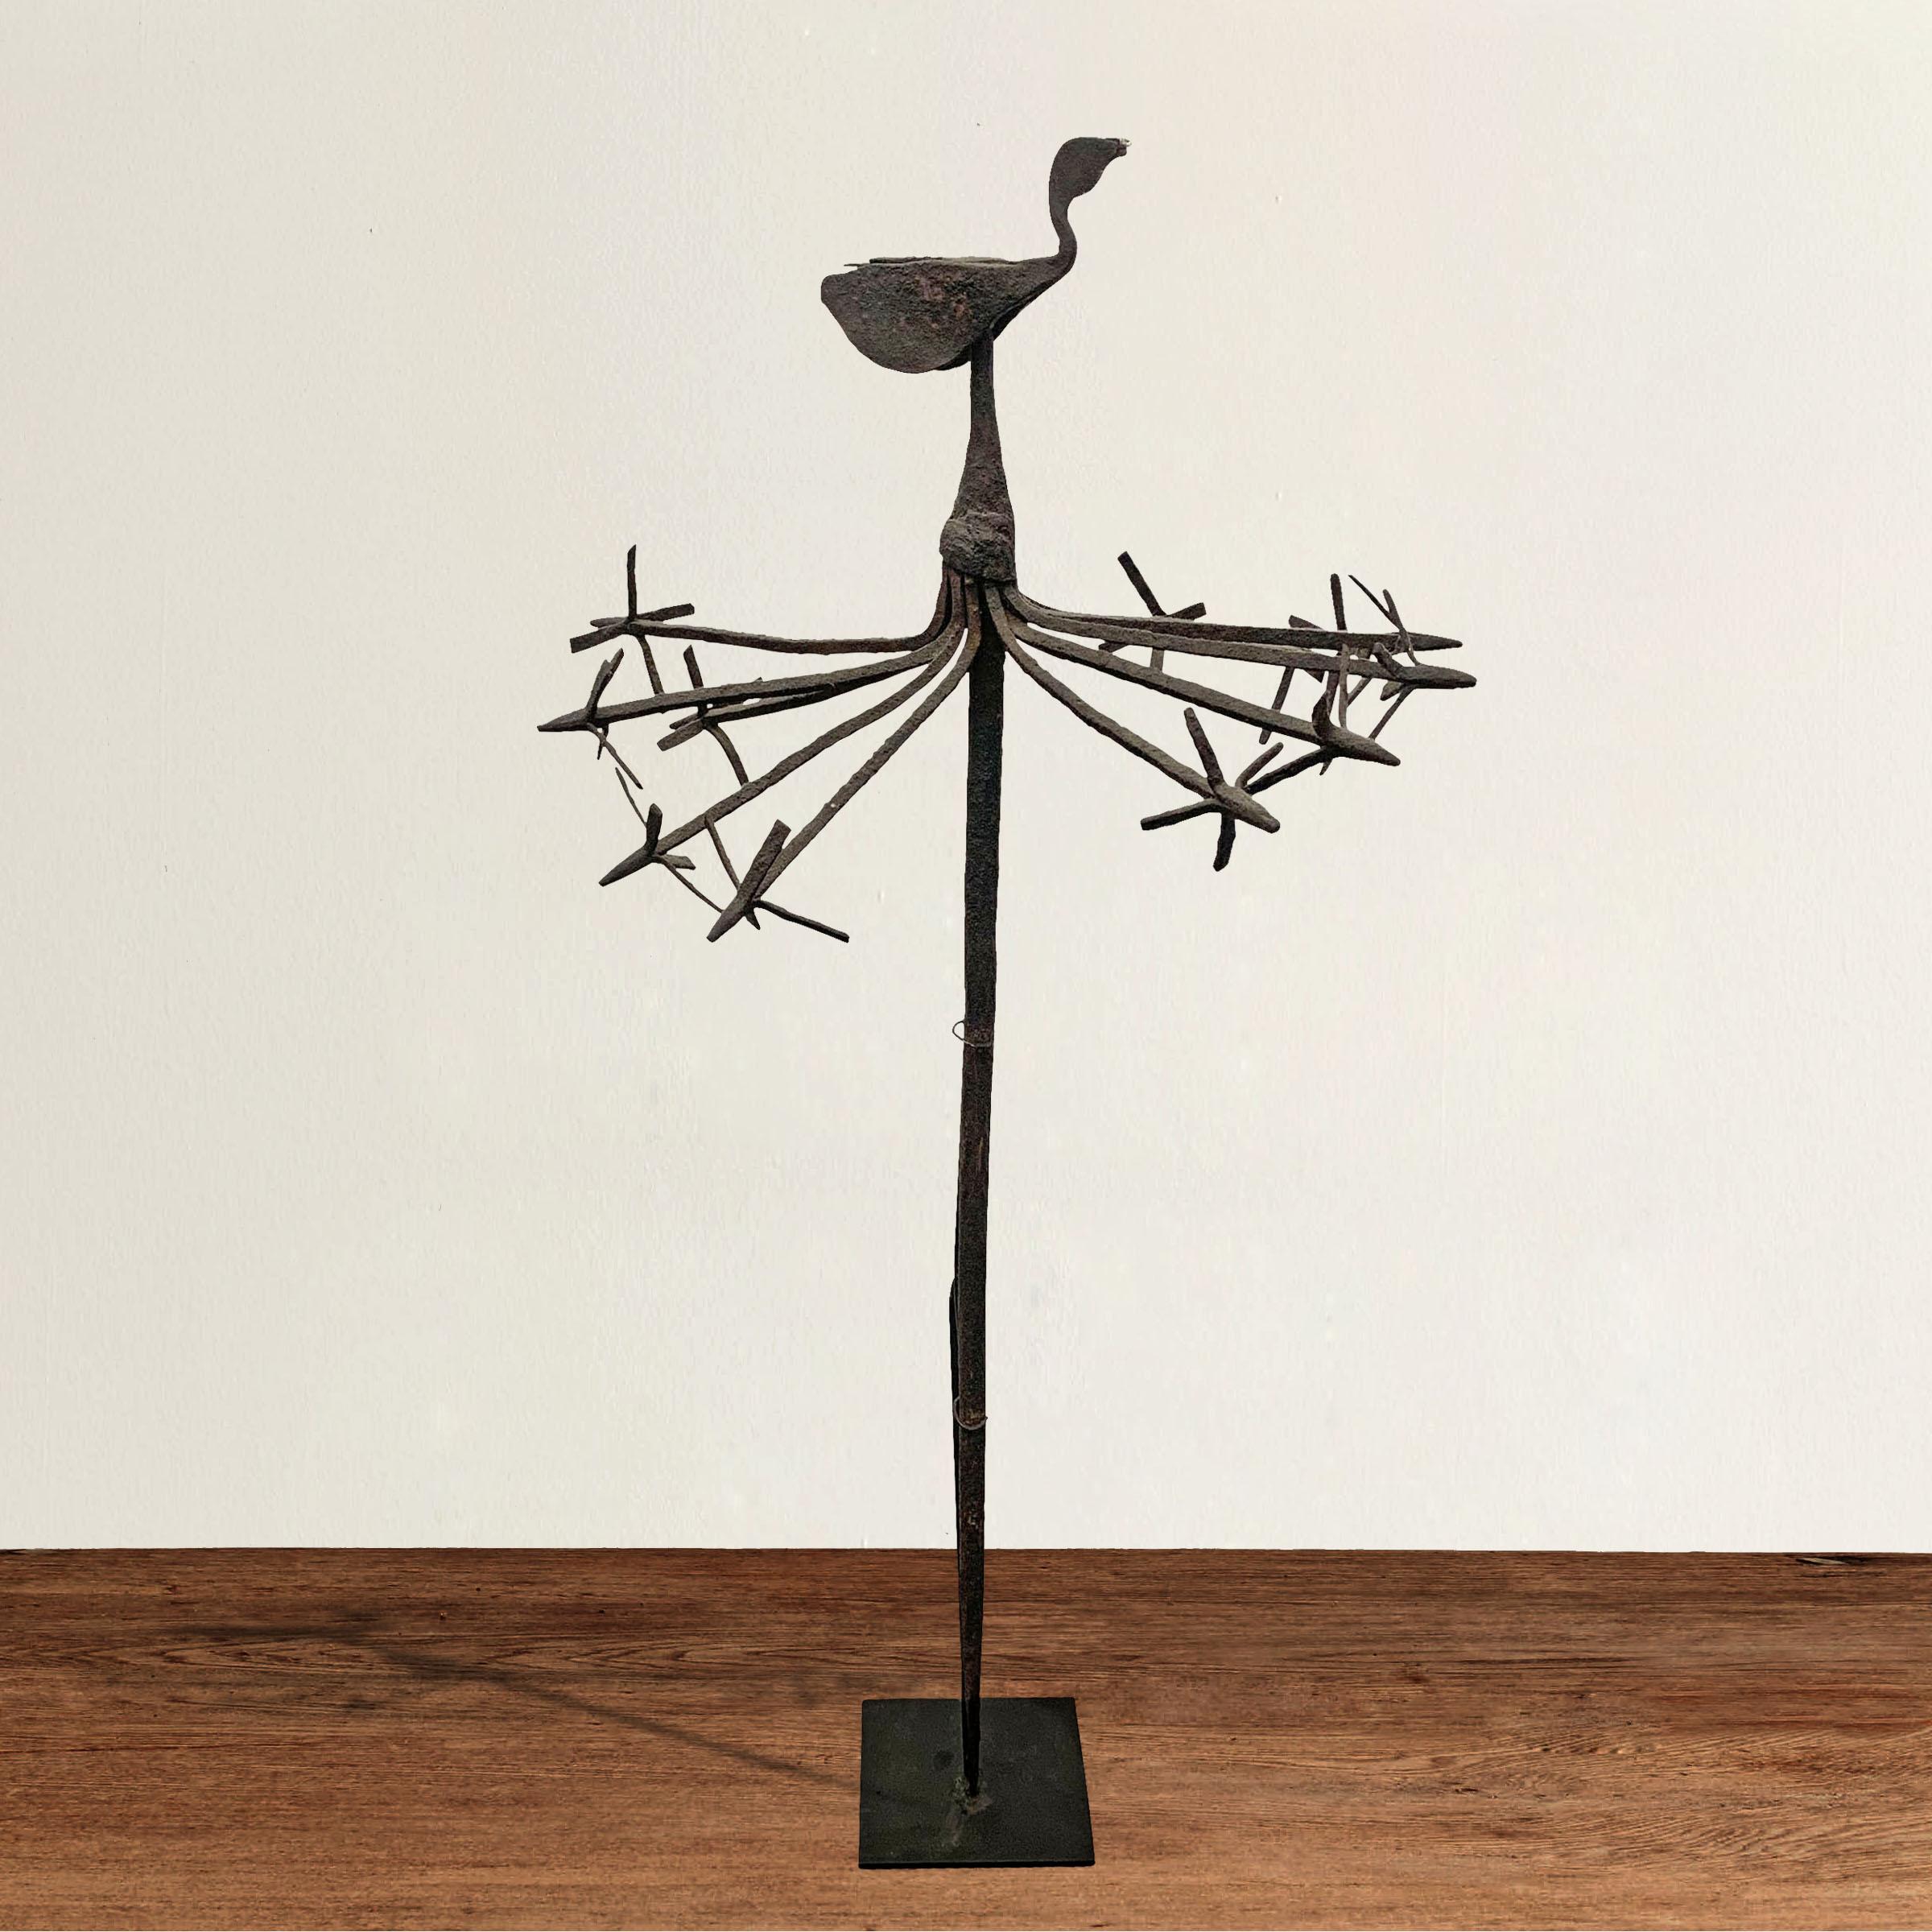 A fantastic early 20th century wrought iron Yoruba ?`sanyìn staff with a large bird in the center, said to represent the ?`sanyìn himself, surrounded by several abstract stylized birds. 
The ?`sanyìn is the deity of plants and herbal medicine and